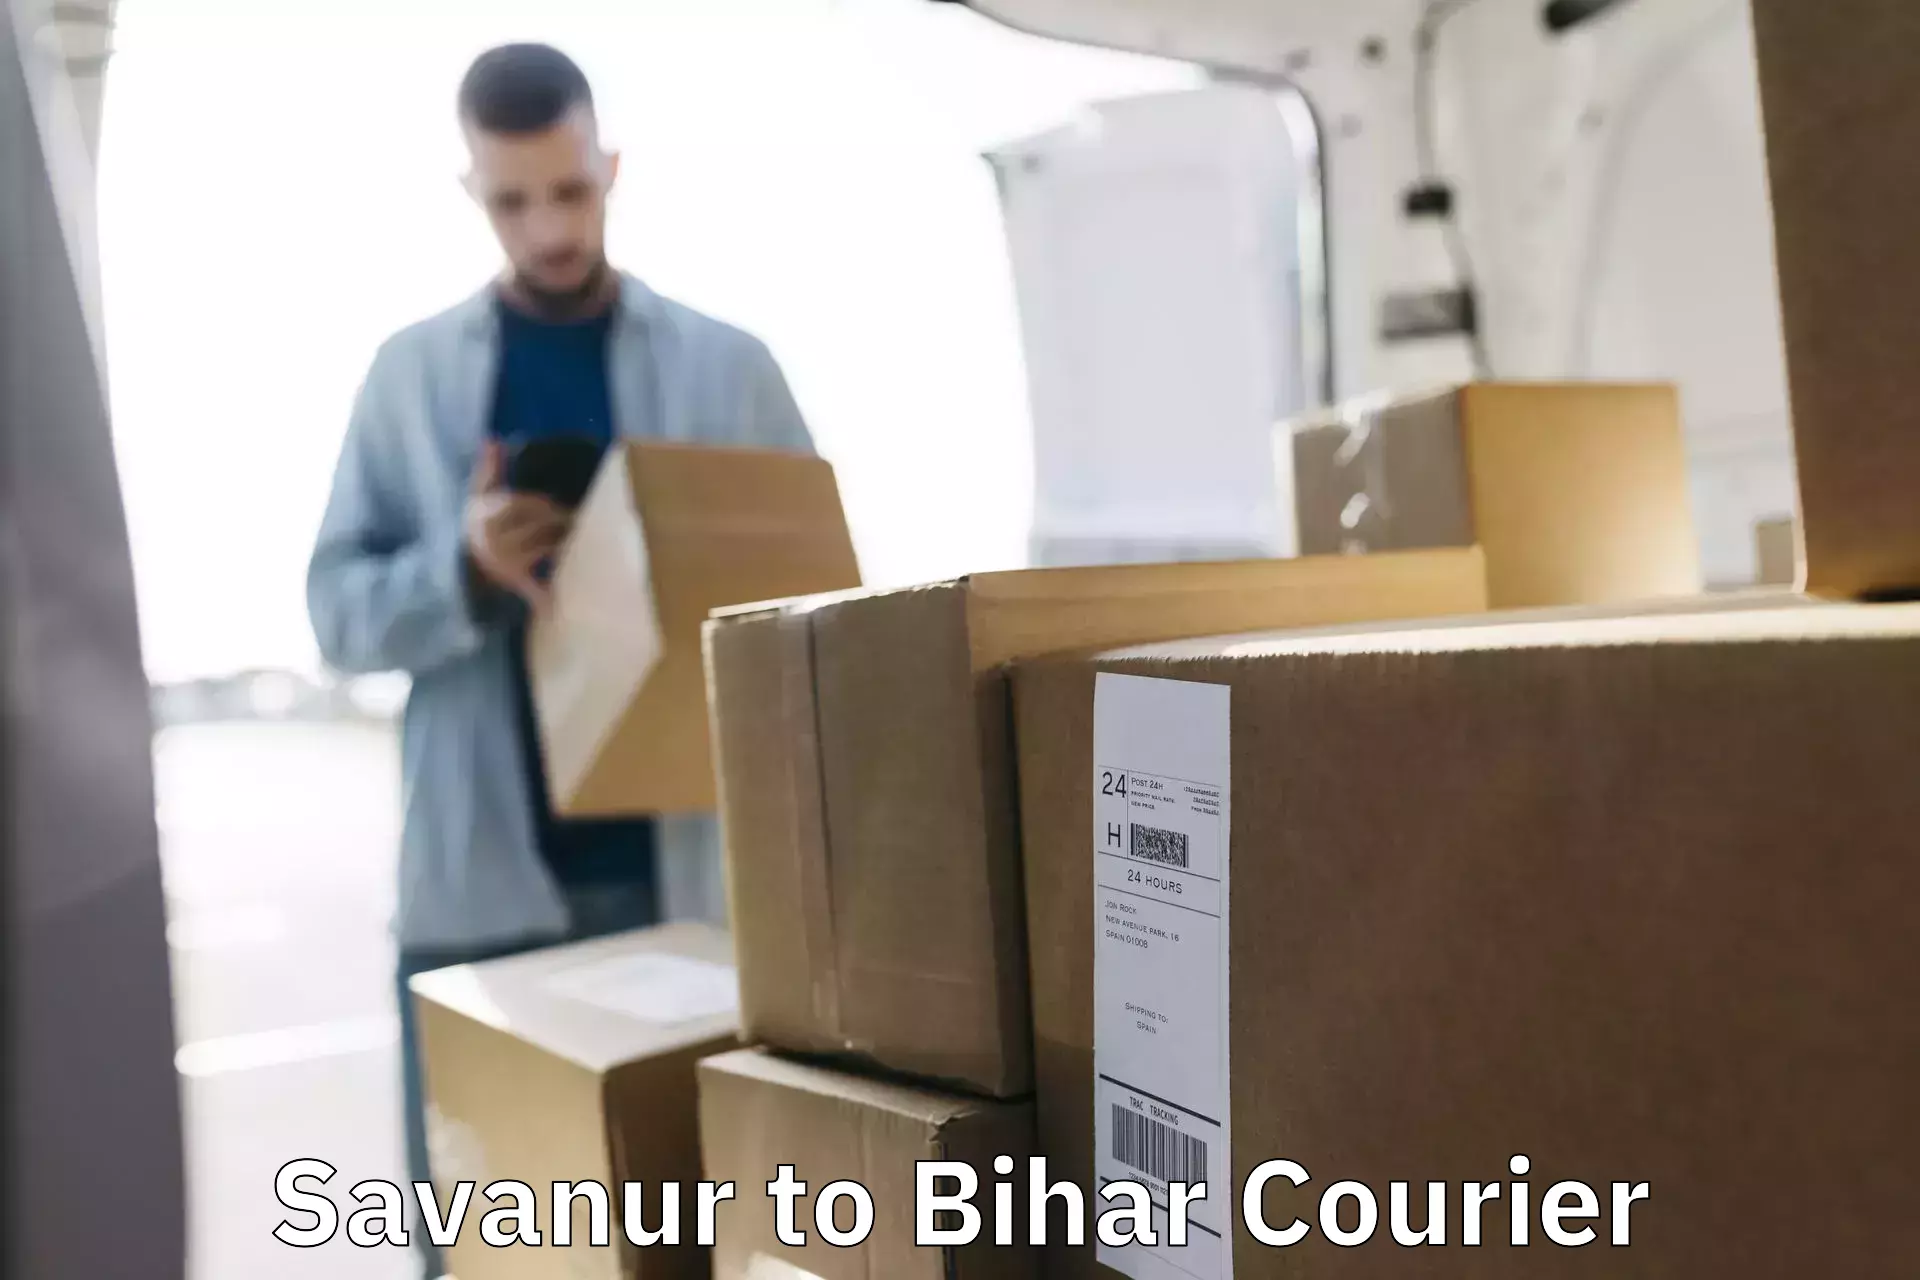 Enhanced tracking features in Savanur to Biraul